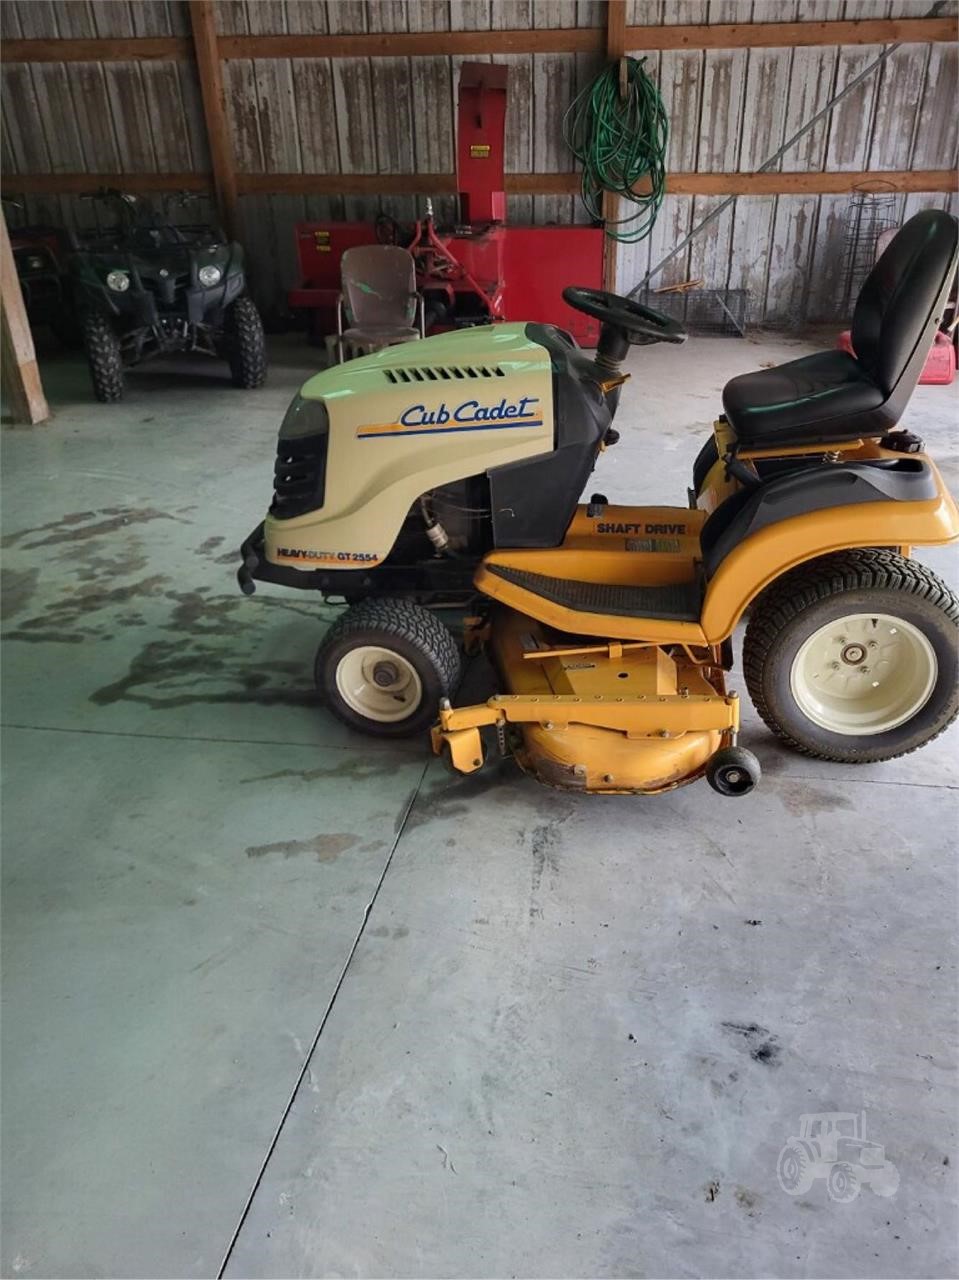 2009 Cub Cadet Gt2554 For Sale In Streator Illinois